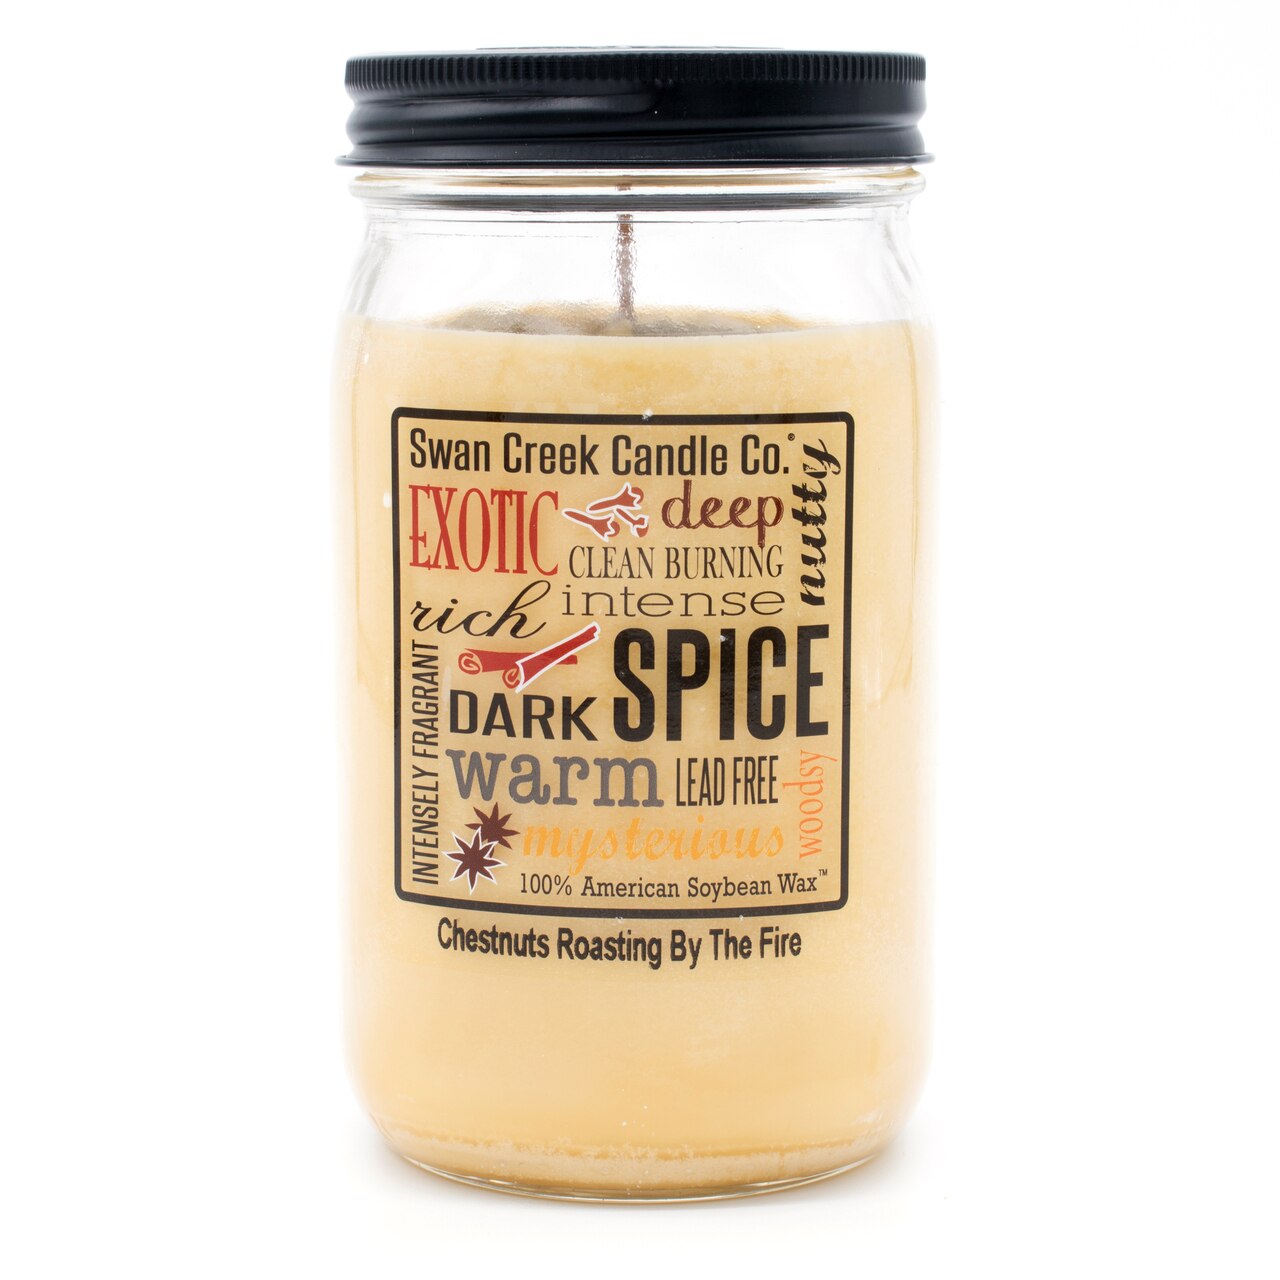 Chestnuts Roasting By The Fire 24oz Pantry Jar by Swan Creek Candle